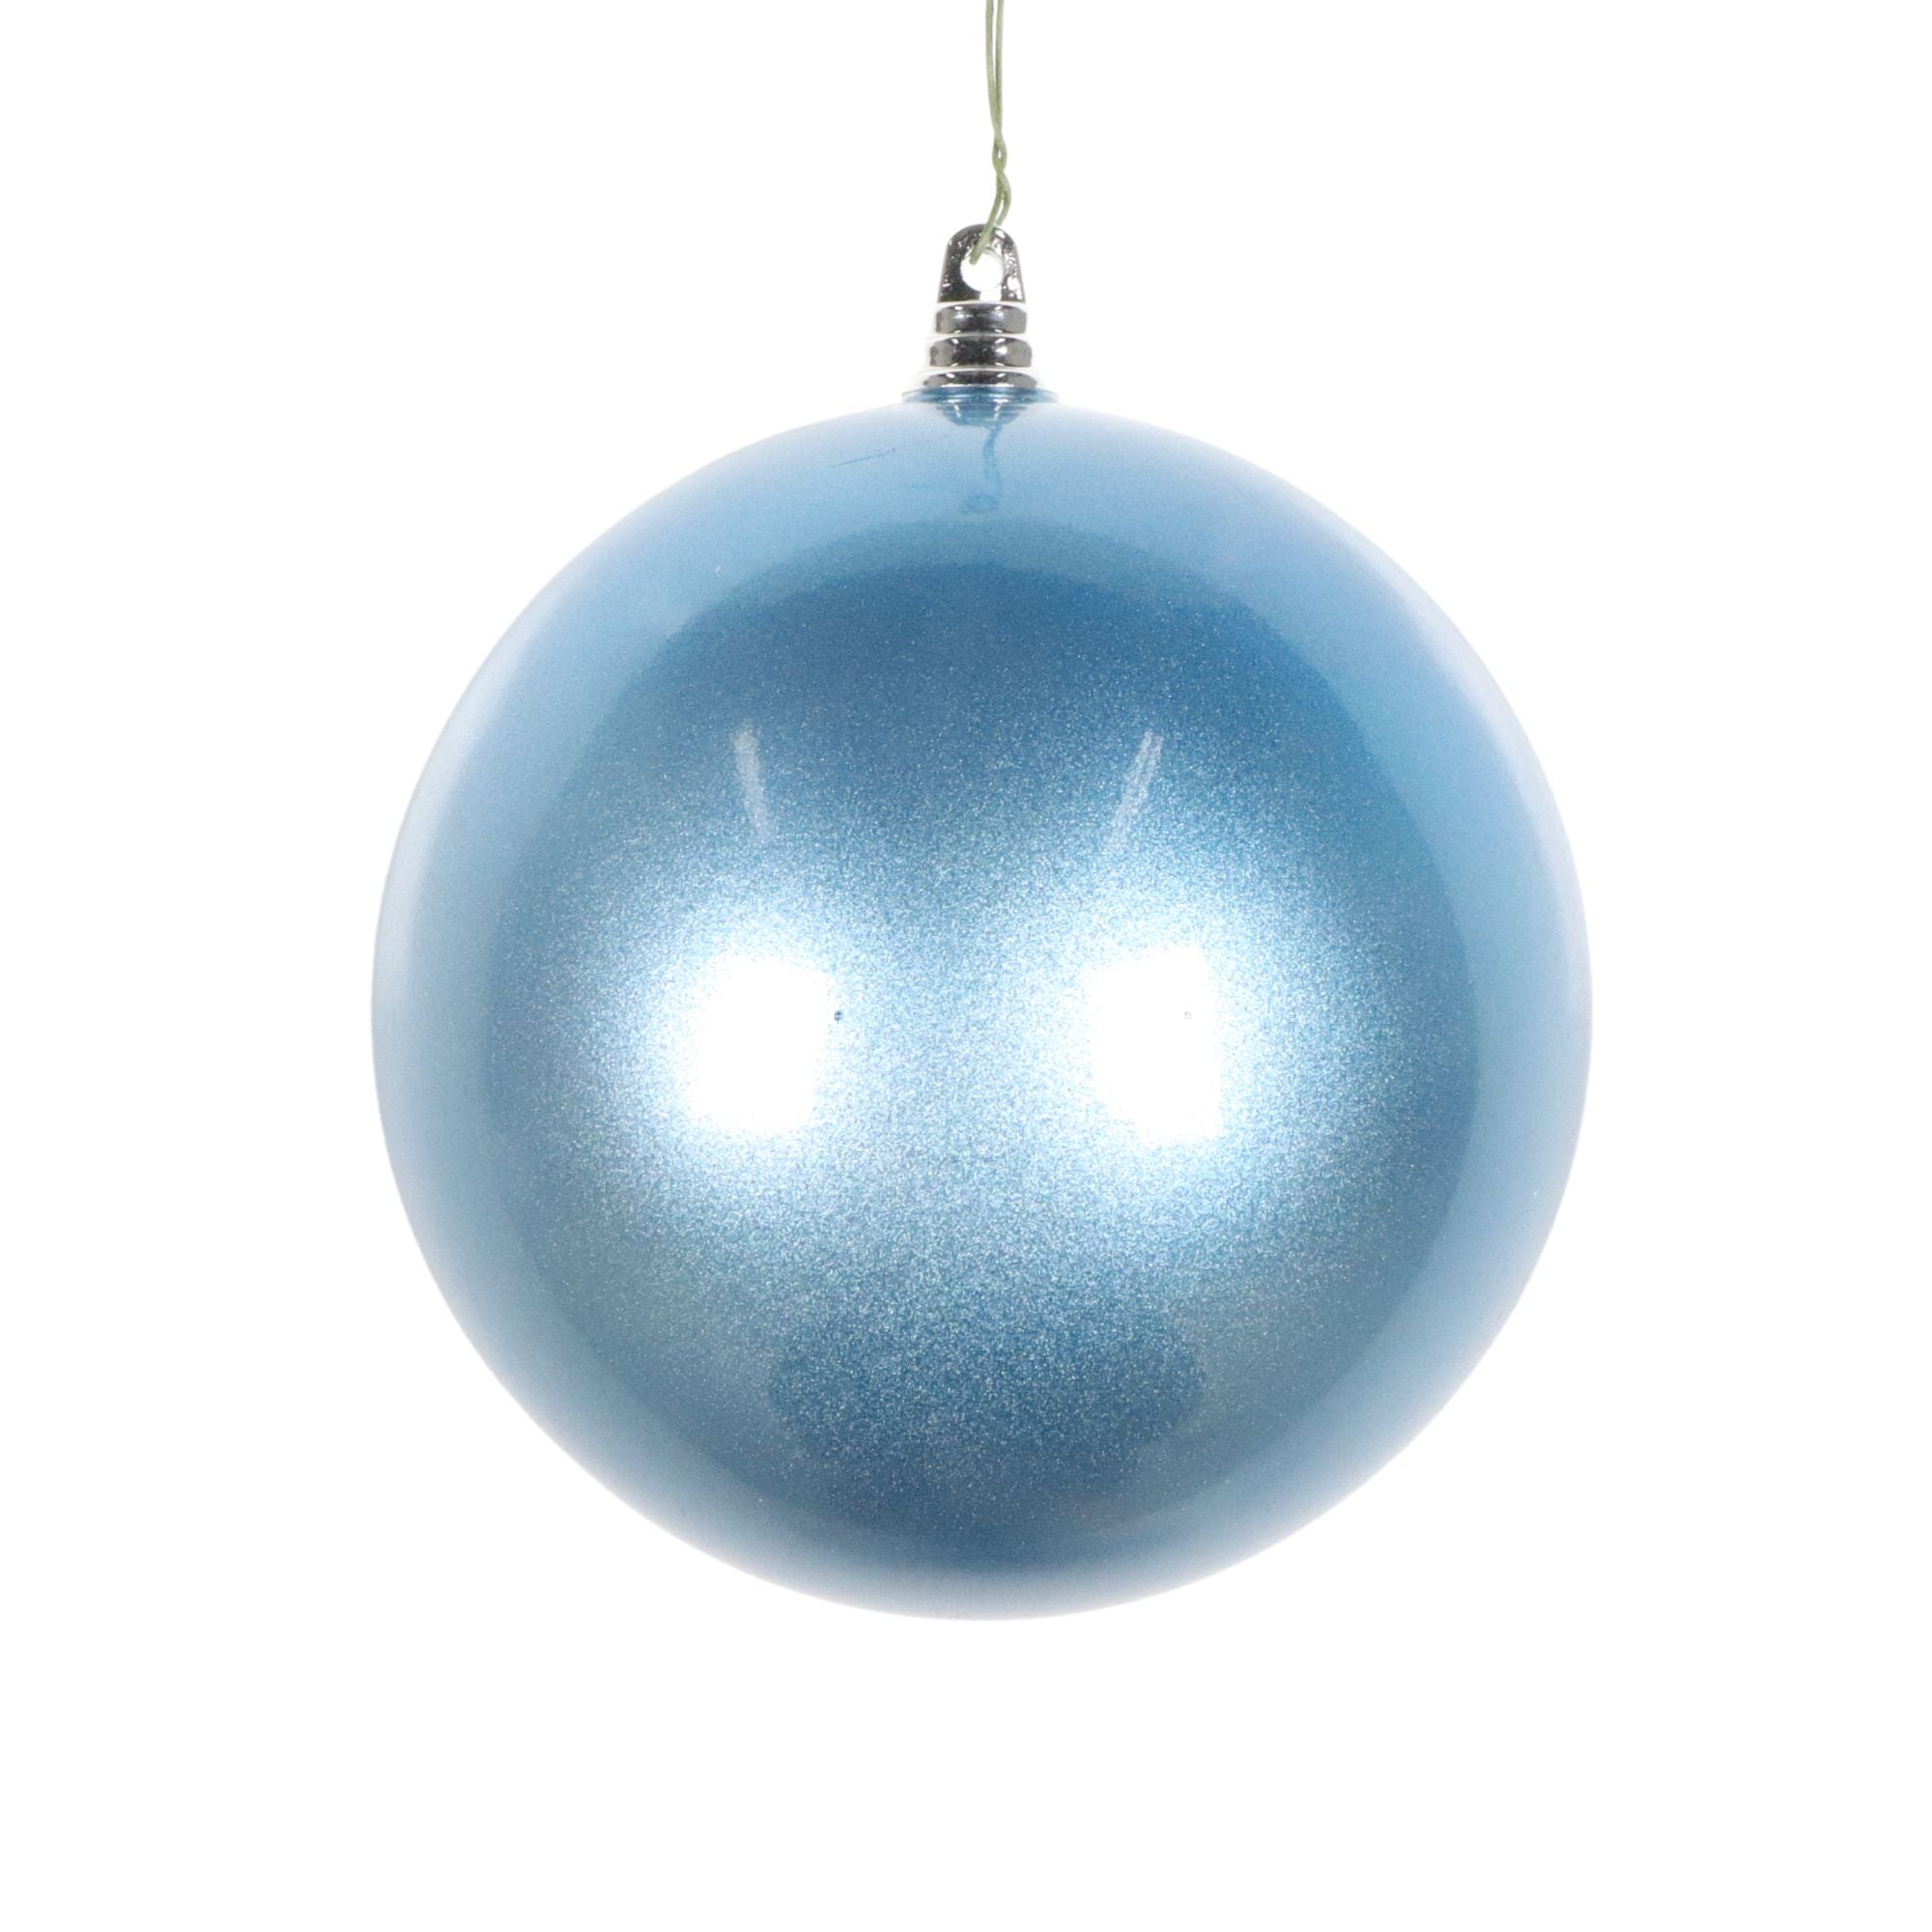 STEEL BLUE CANDY APPLE ORNAMENT (PREORDER)